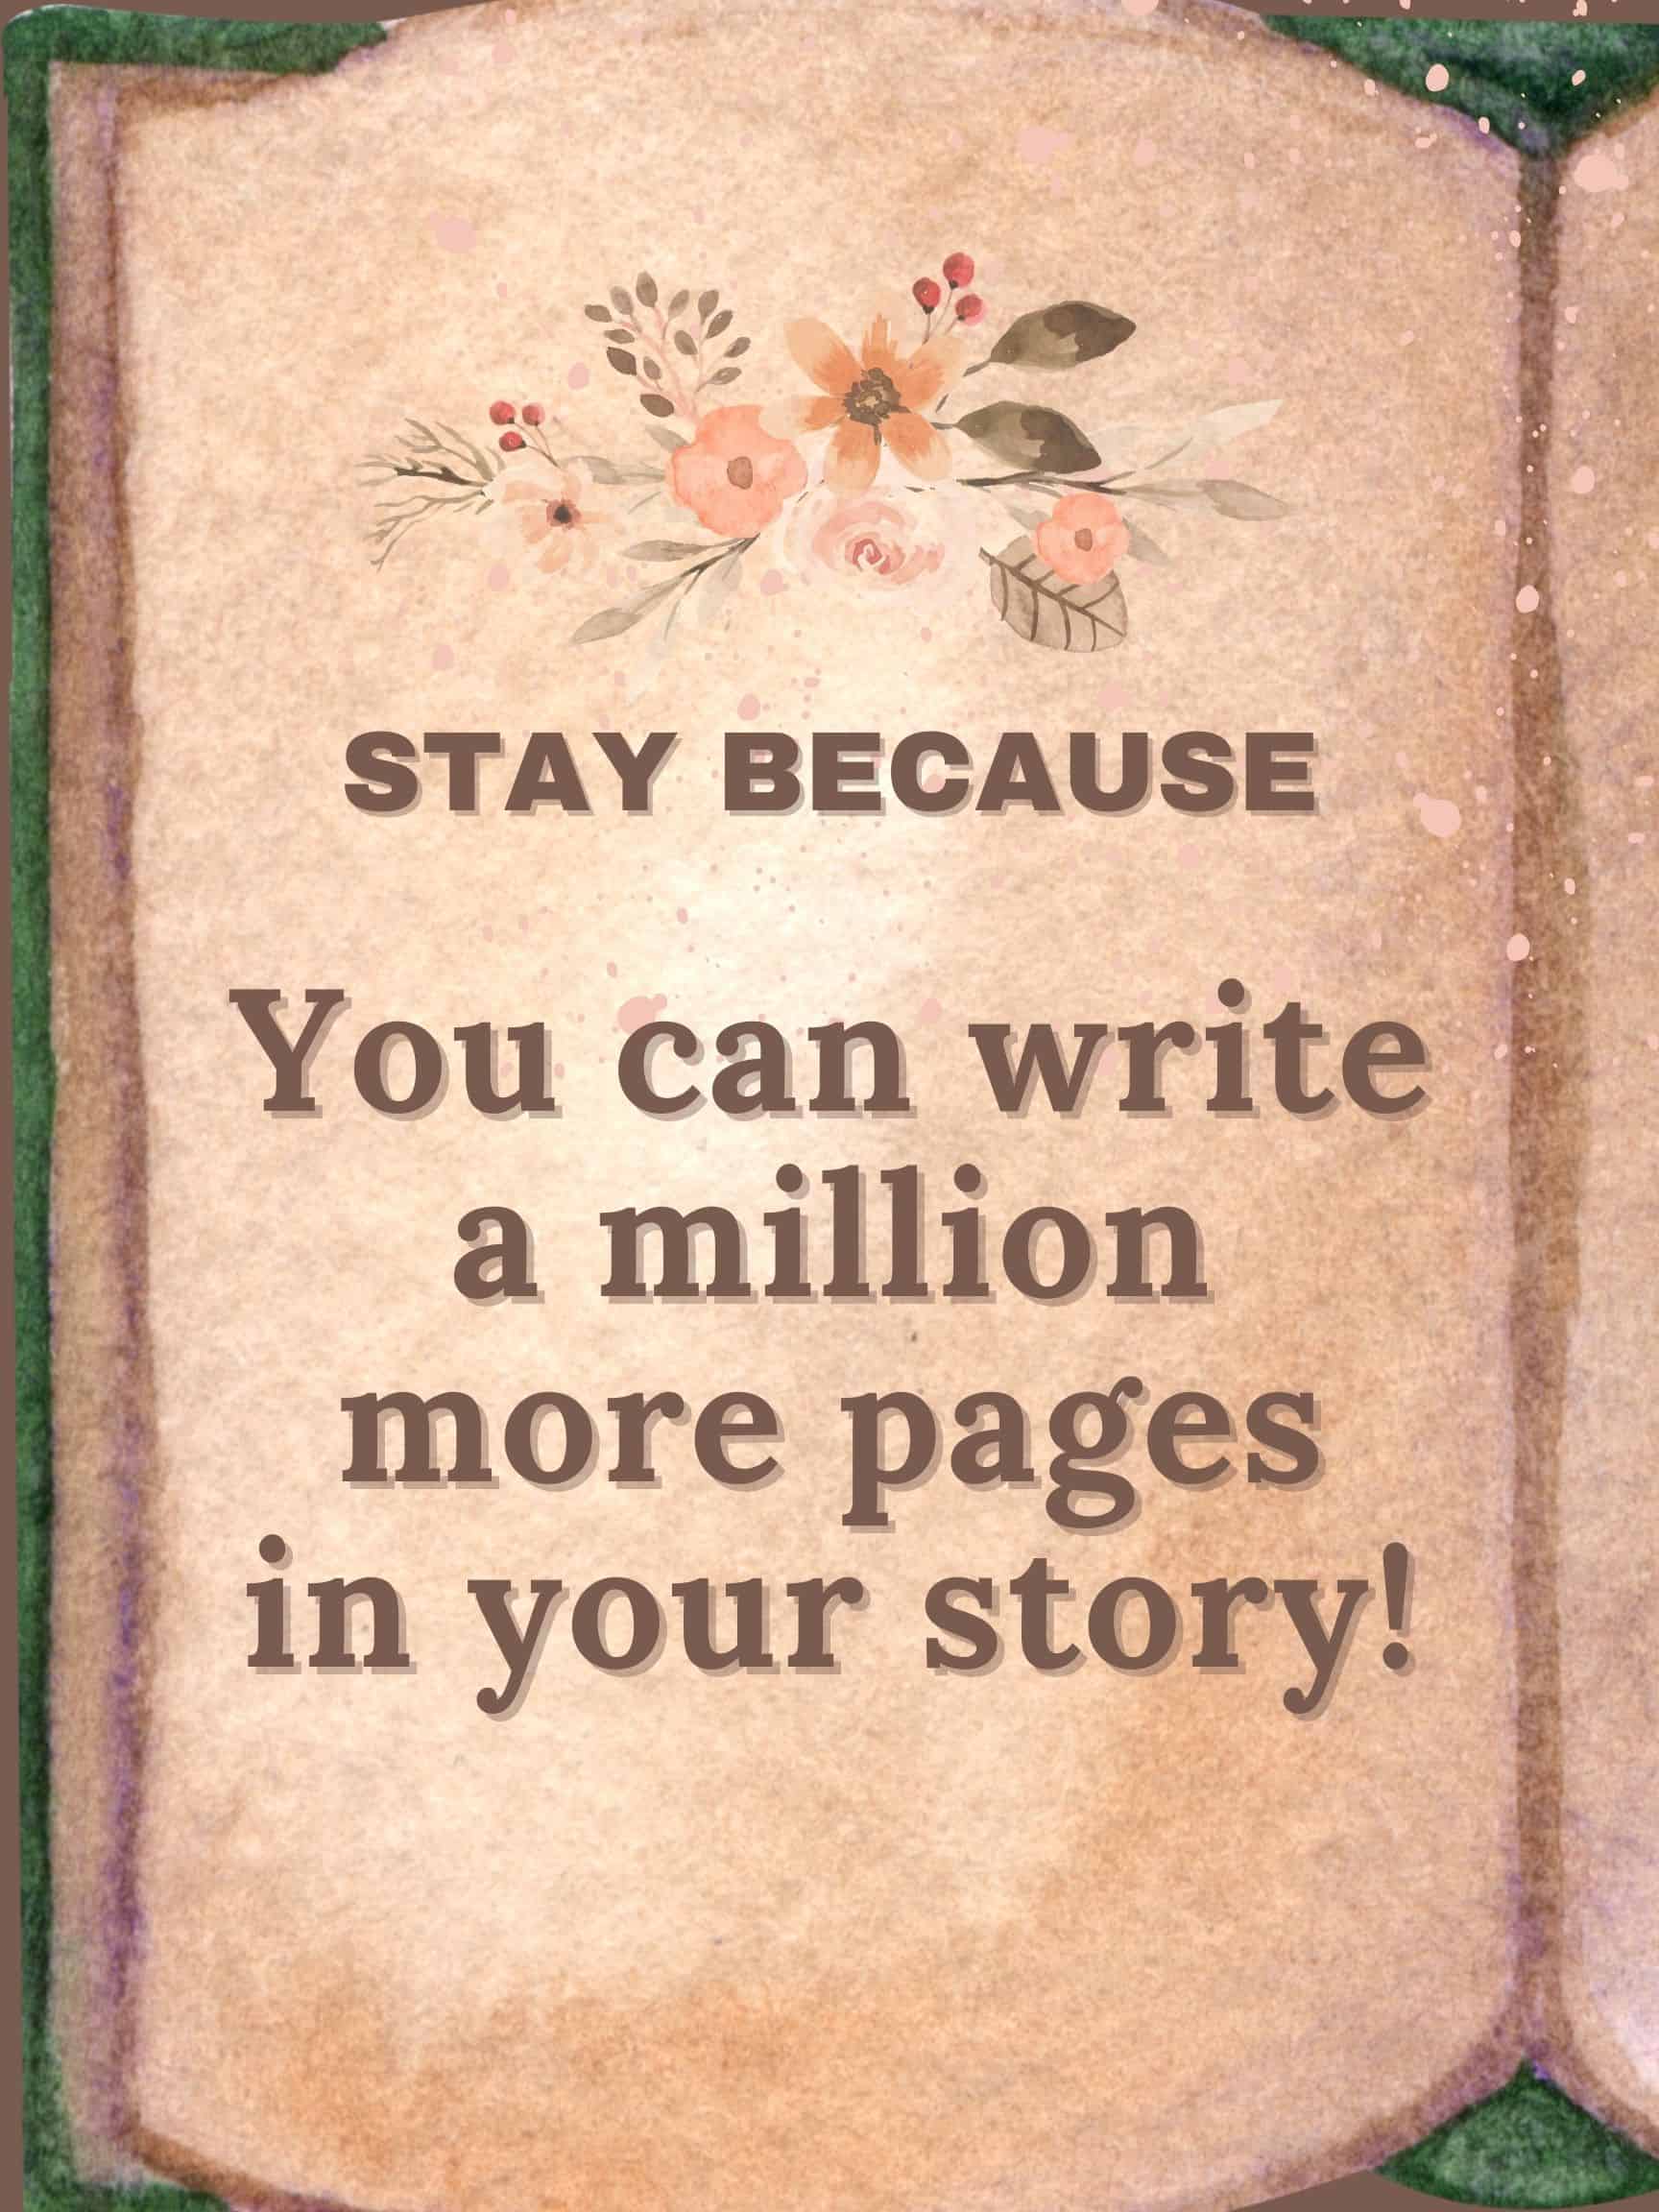 Stay because you can write a million more pages in your story #staybecause